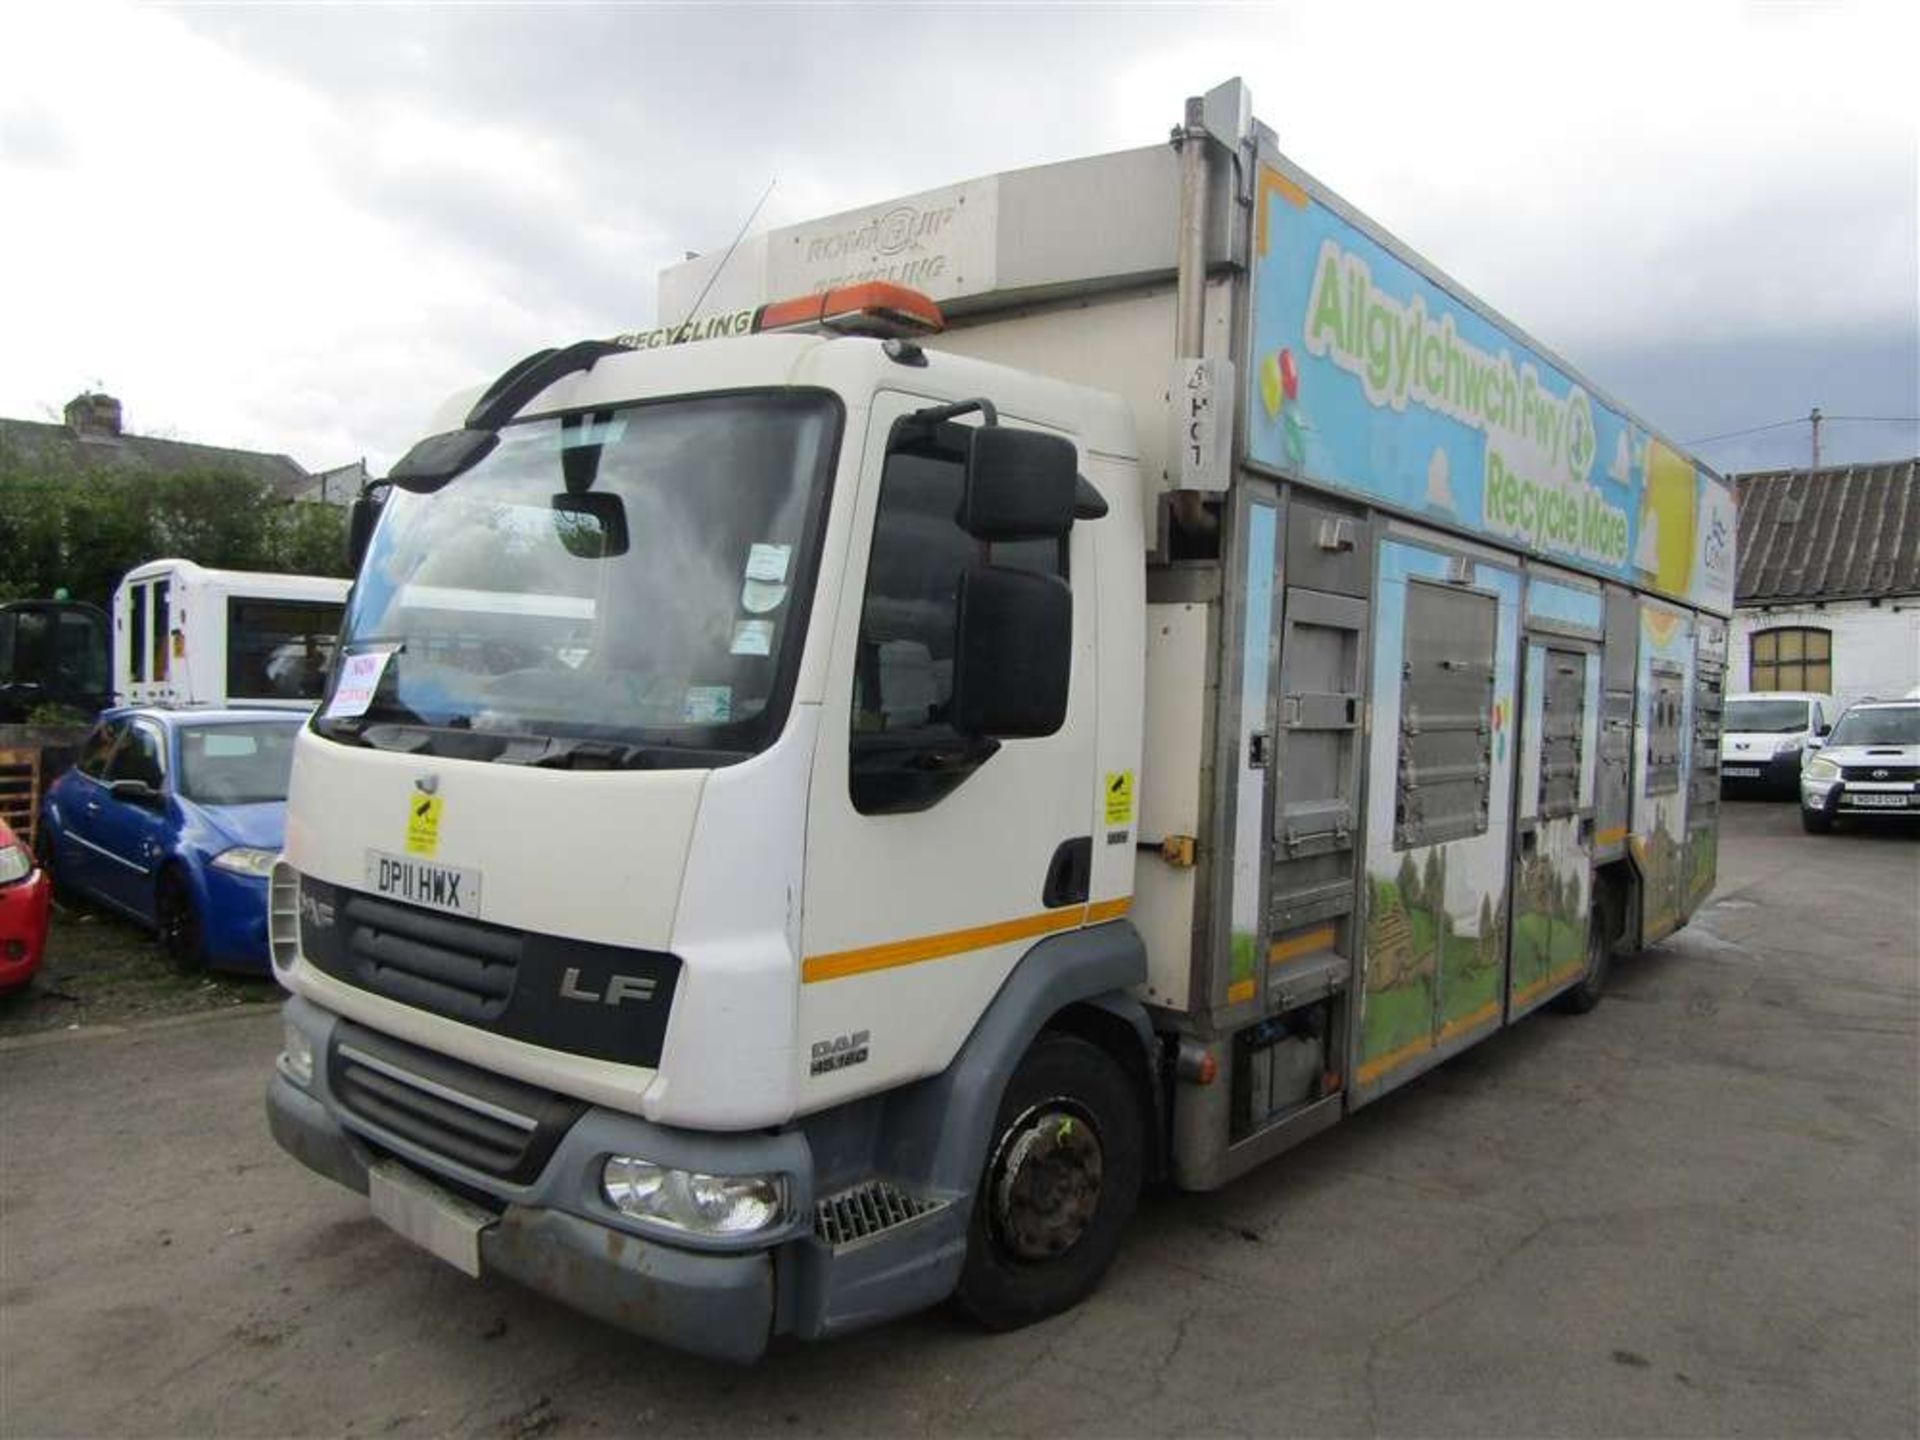 2011 11 reg Leyland DAF FALF45-160 12v Recycling Vehicle (Non Runner) (Direct Council) - Image 2 of 5